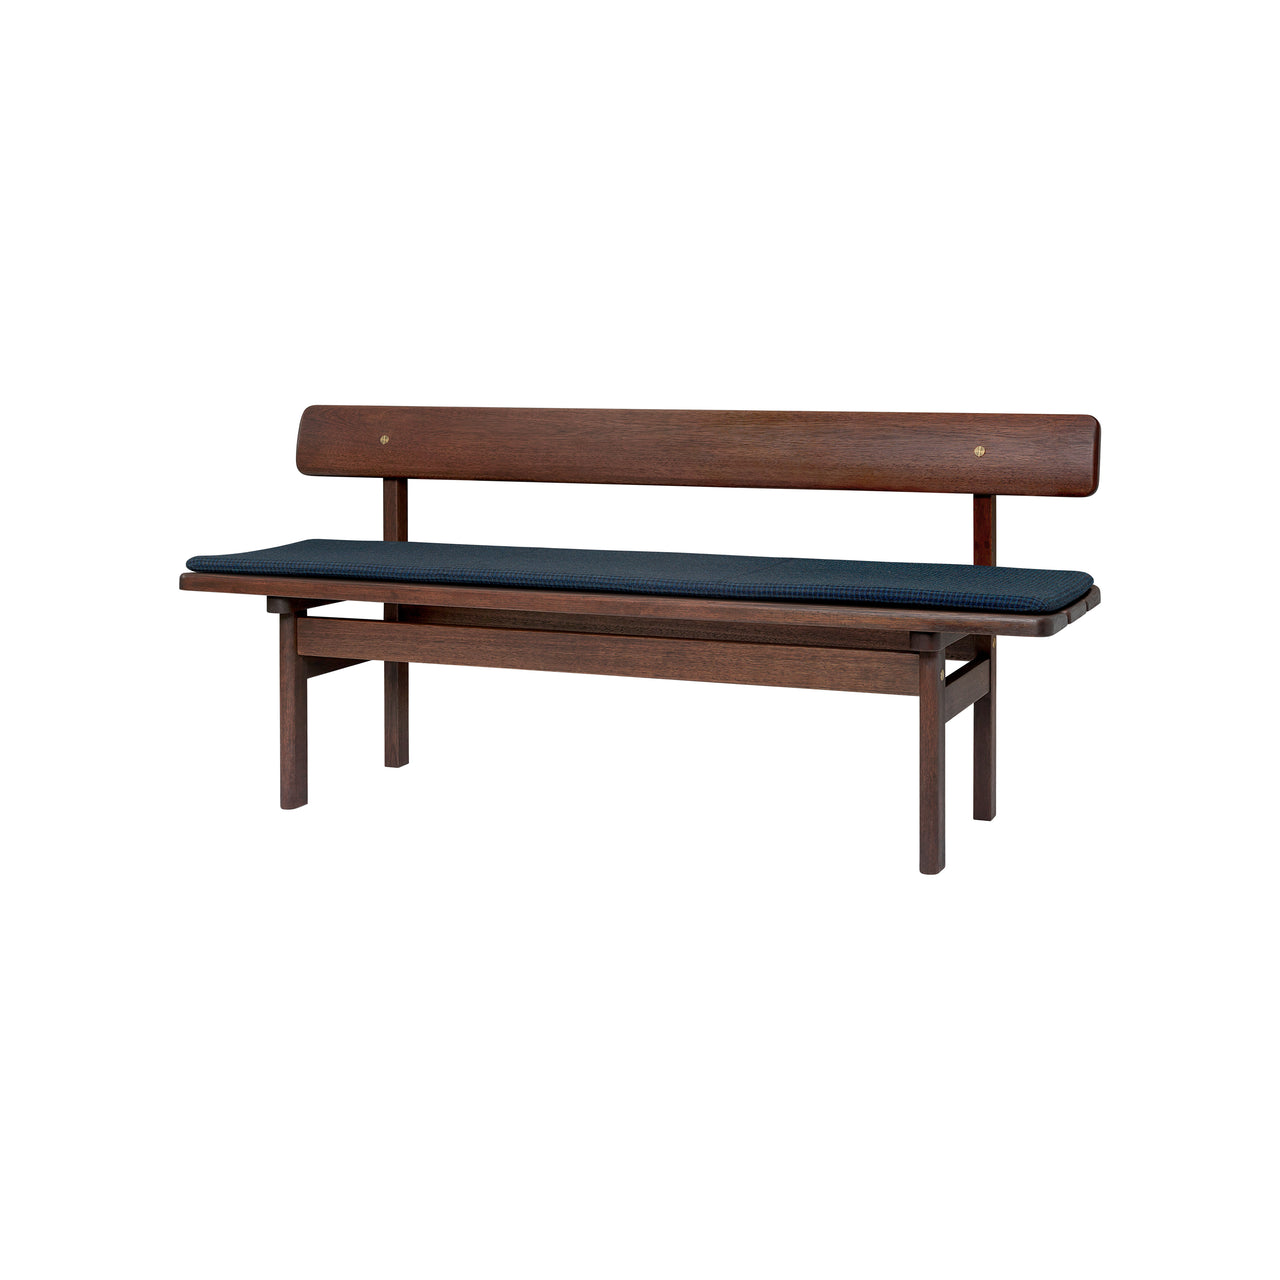 BM0699 Asserbo Bench with Backrest + Cushion: Recheck 0875